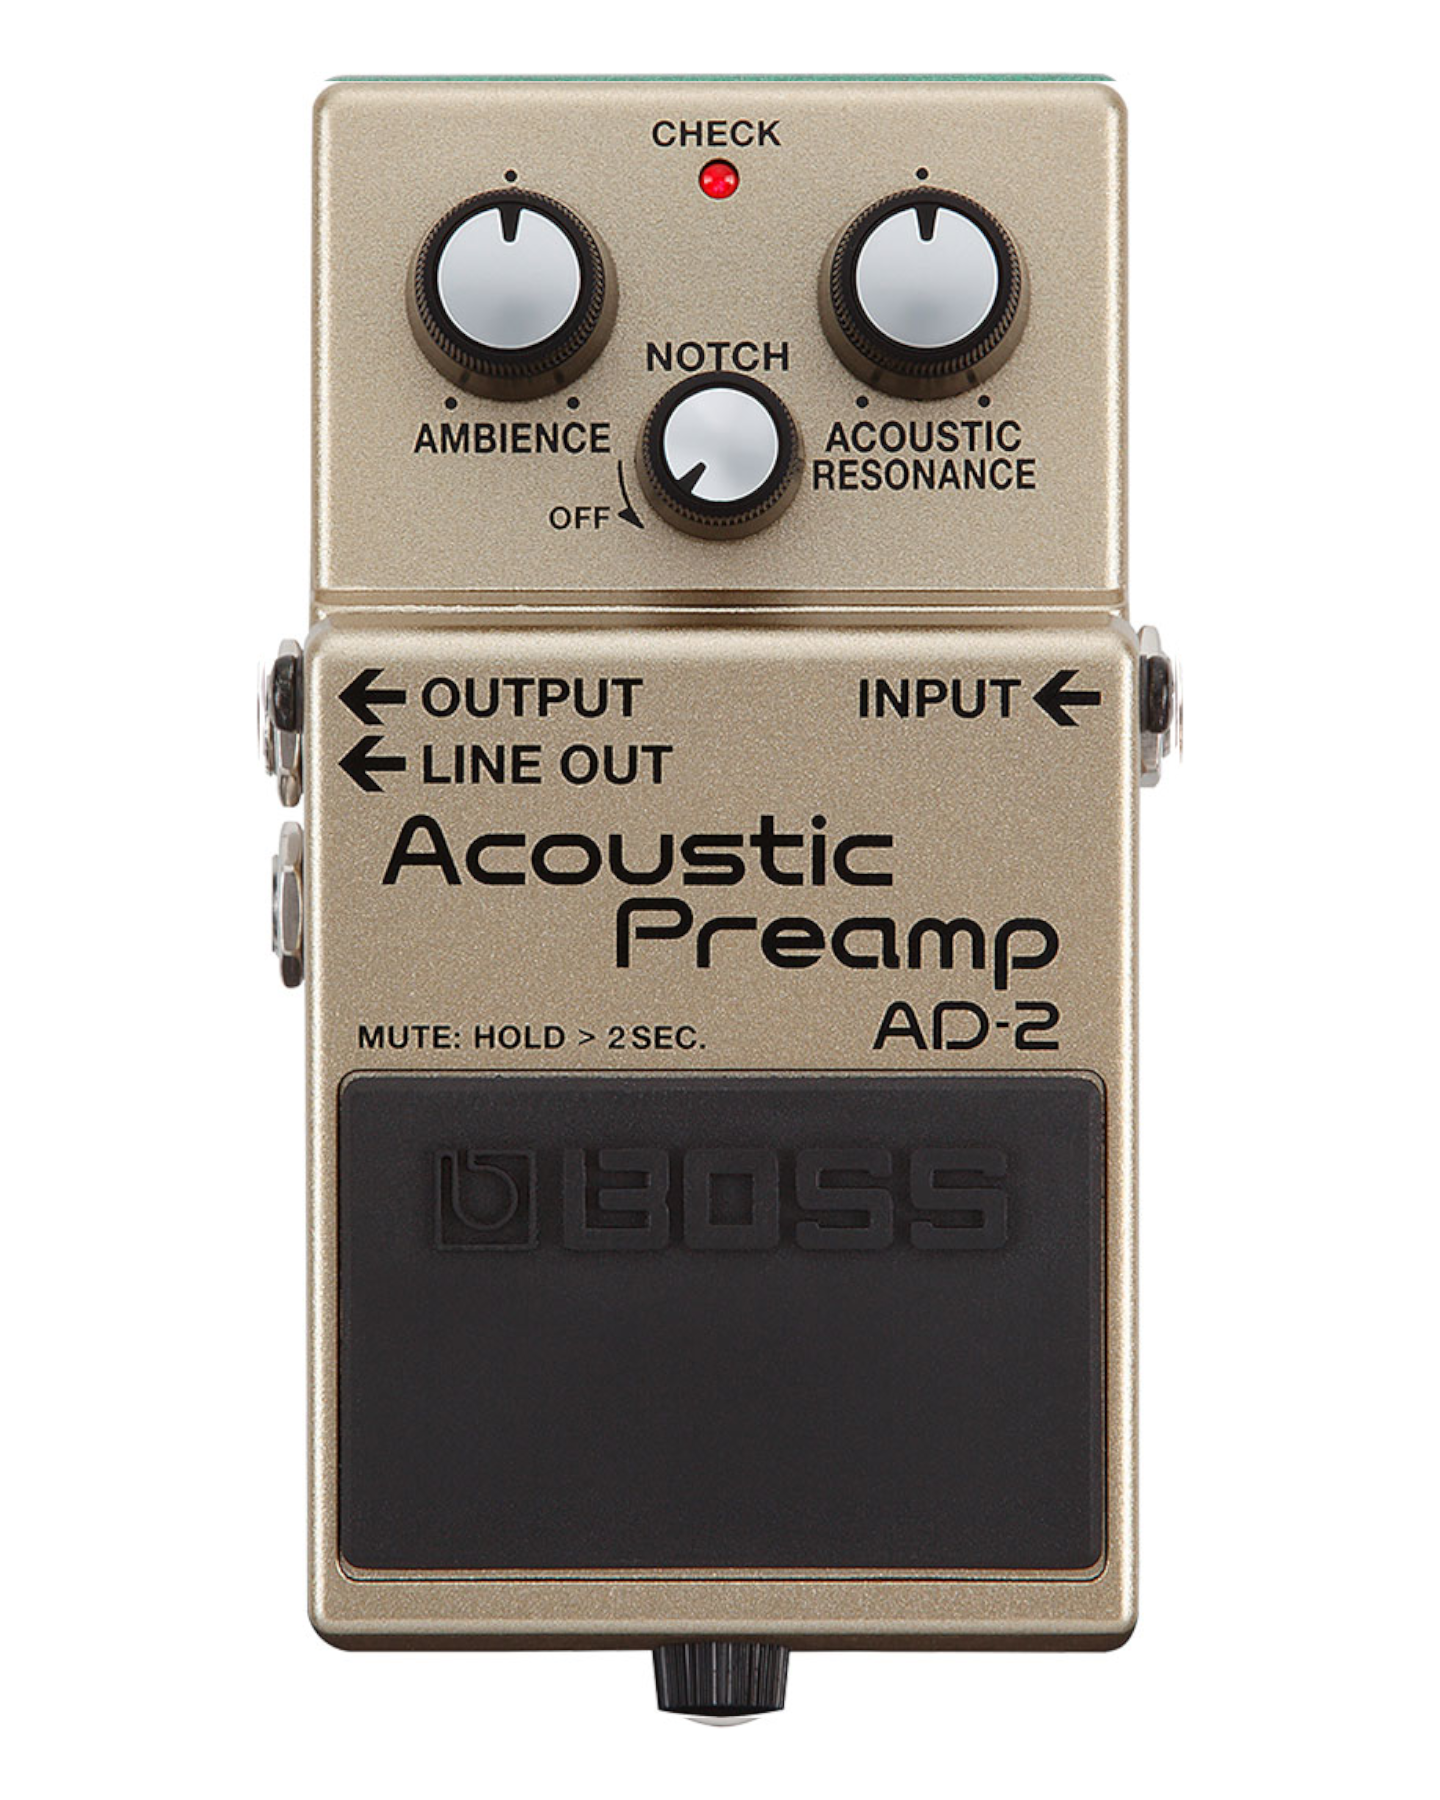 AD-2 Acoustic Preamp